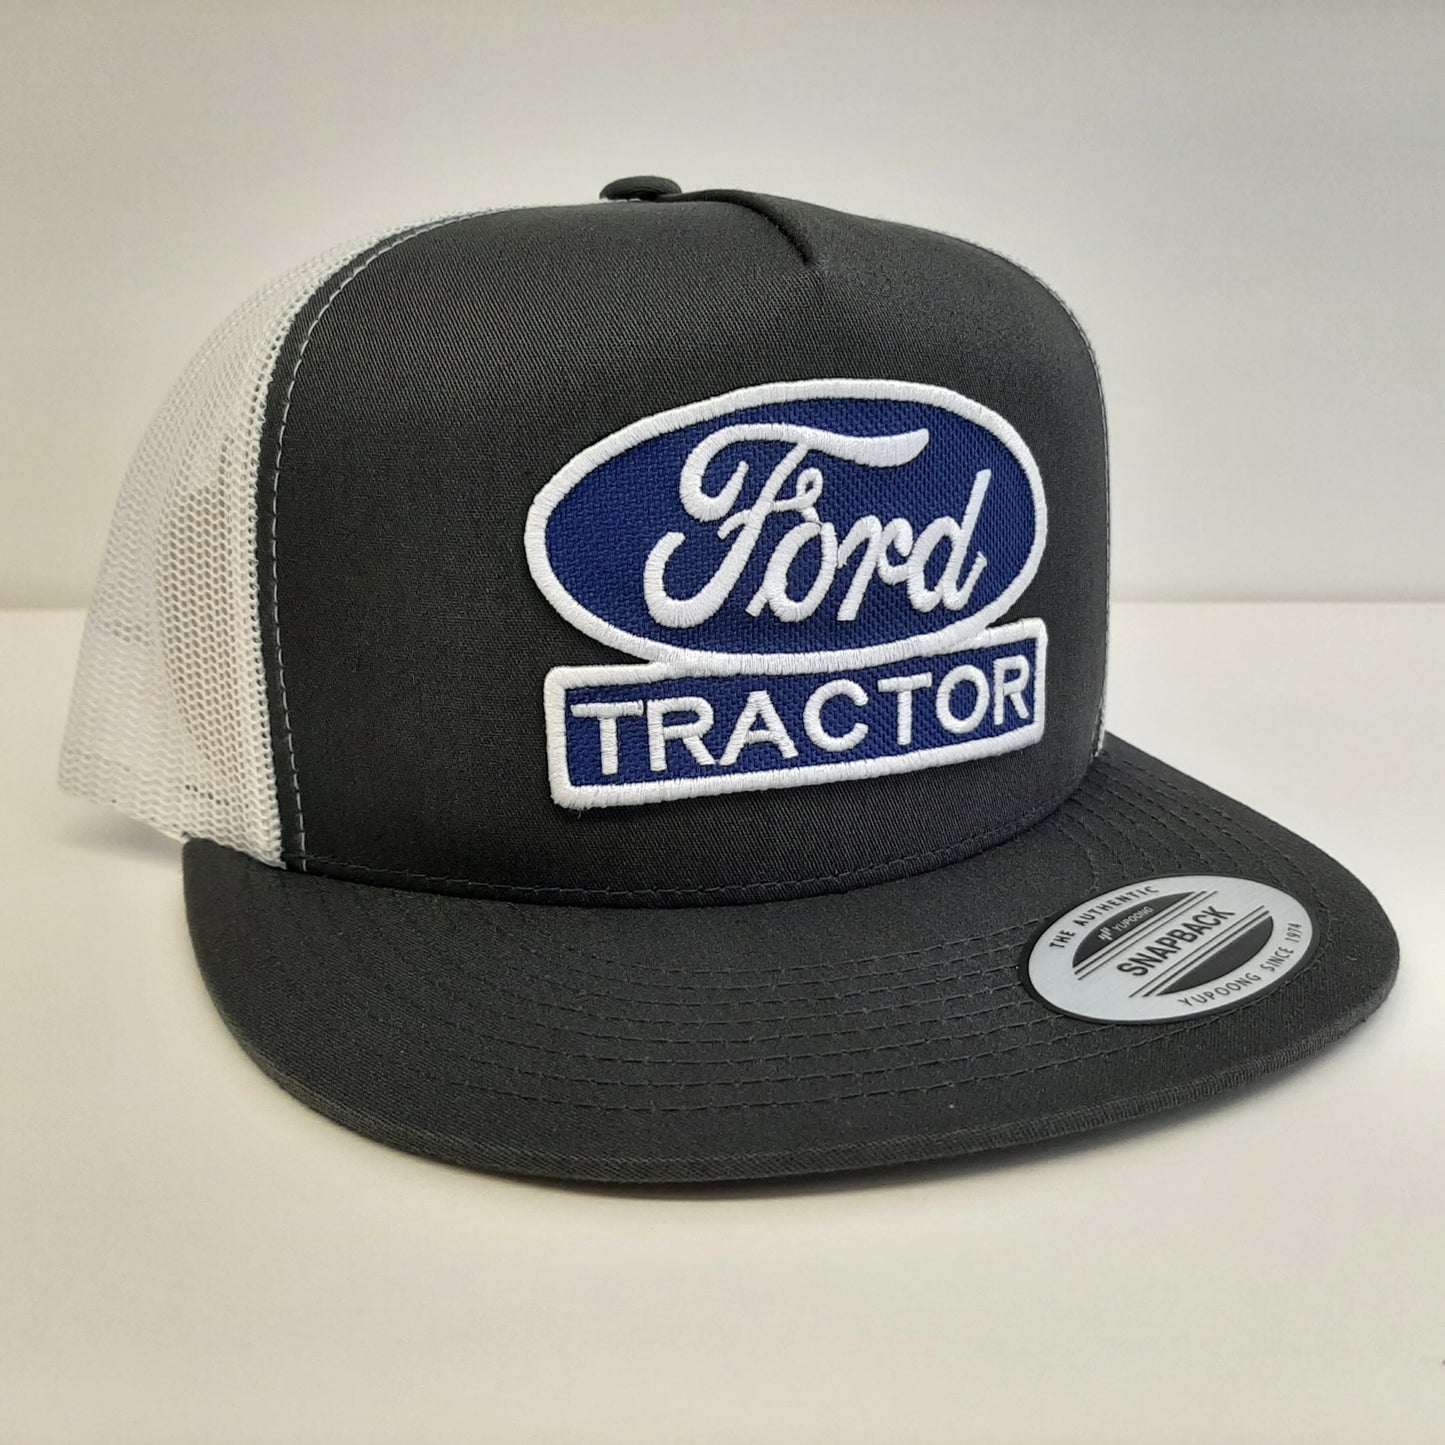 Ford Tractor Embroidered Patch Flat Bill Snapback Mesh Hat Cap Blue Yupoong